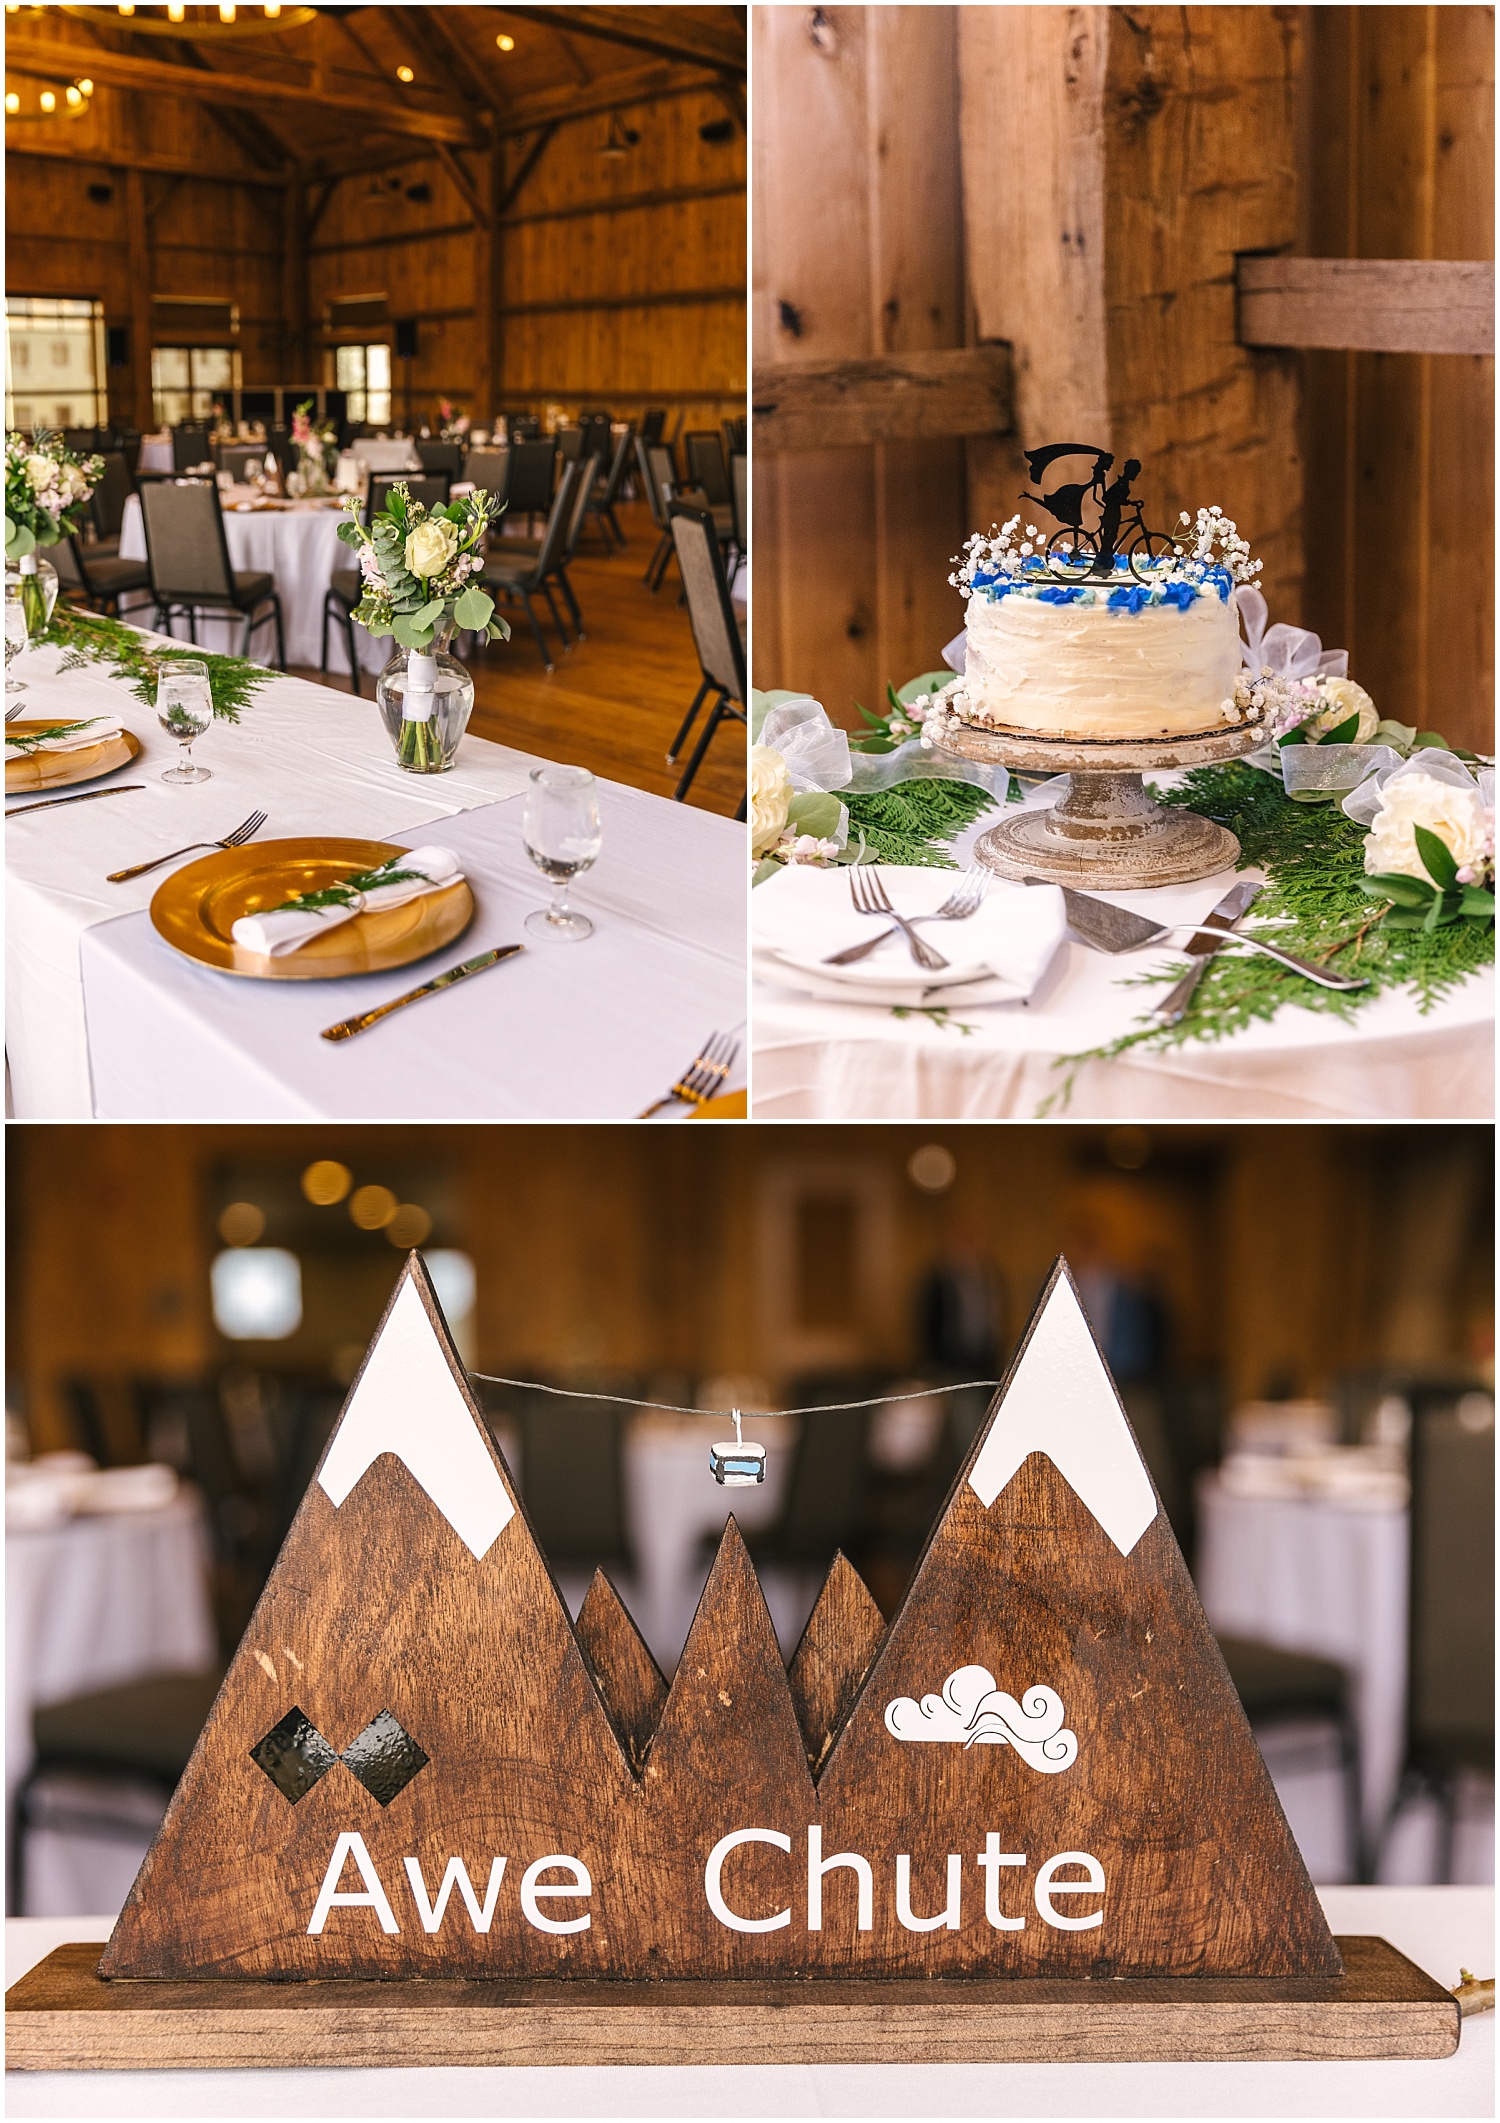 Ski run names for table runners and pine branches for outdoorsy couple's wedding